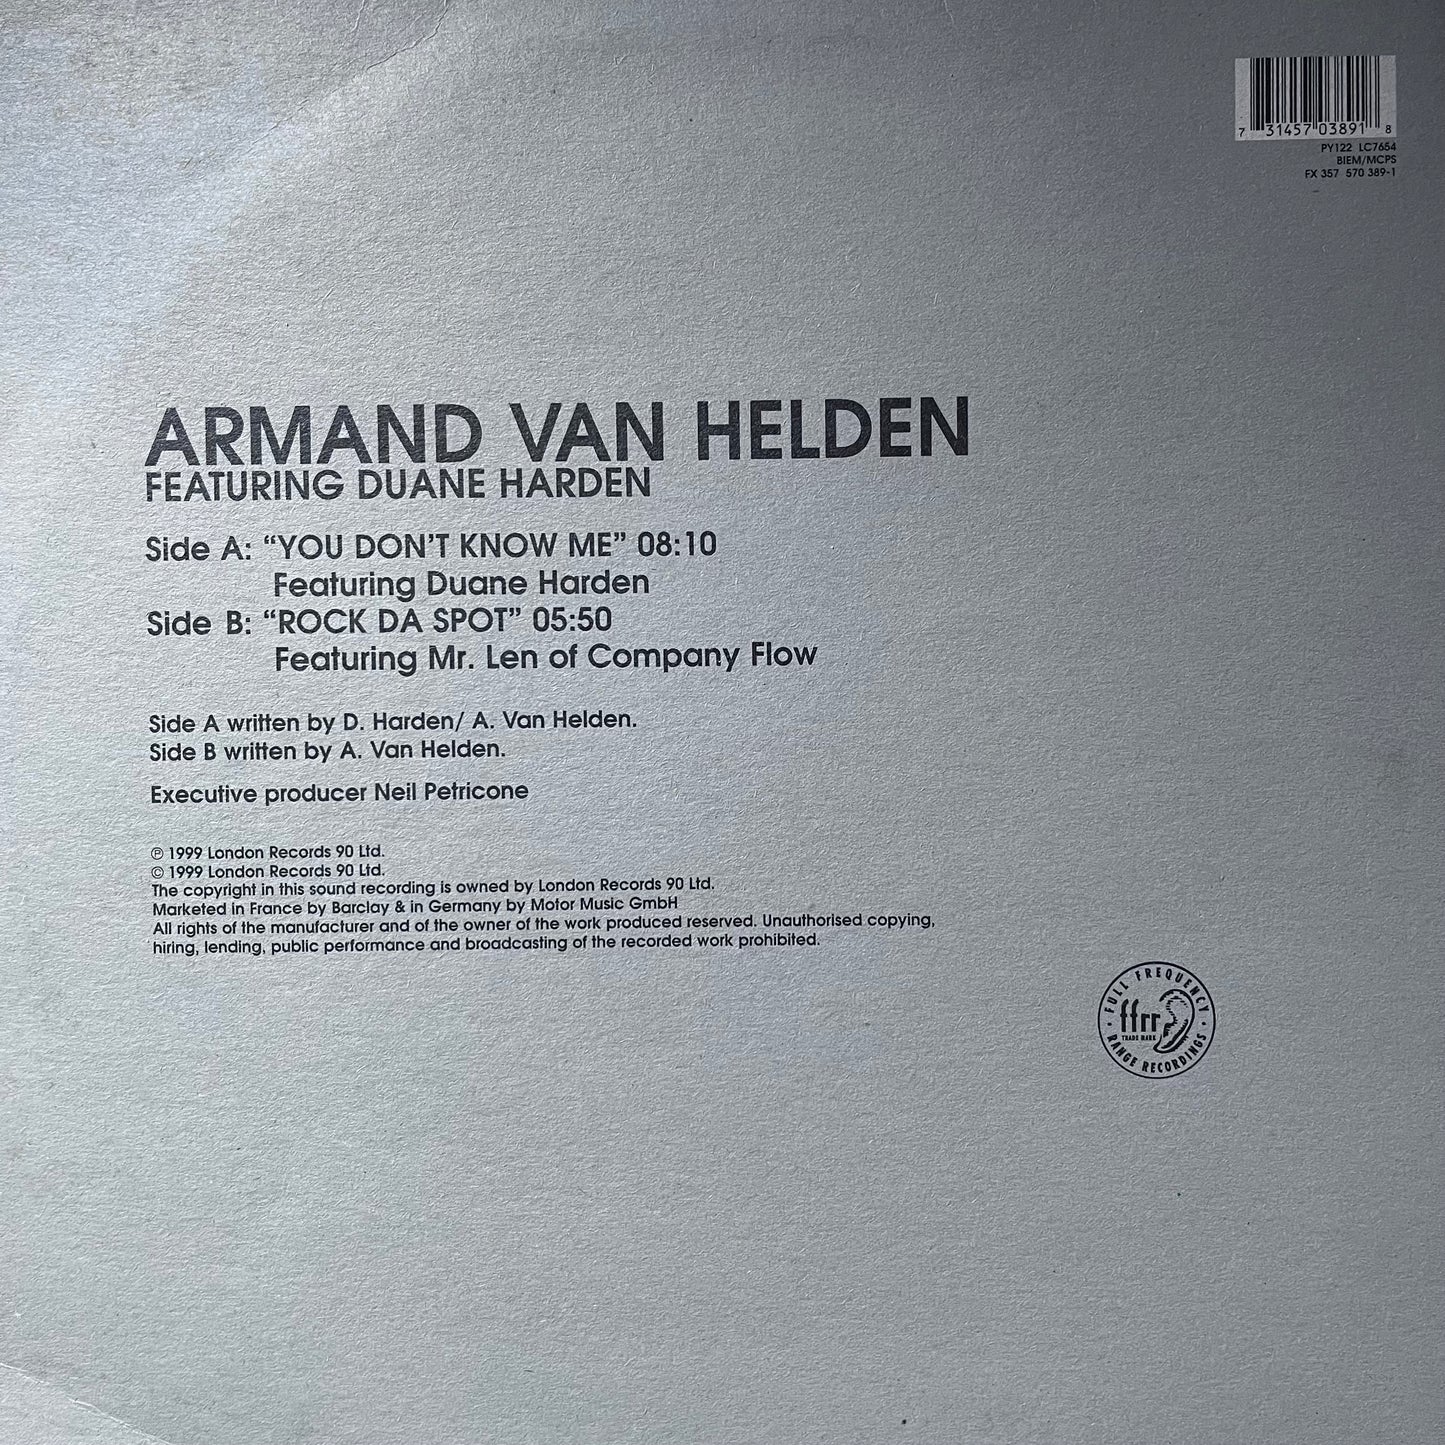 Armand Van Helden “You Don’t Know Me” Feat Duane Harden 2 Track 12inch Vinyl Record